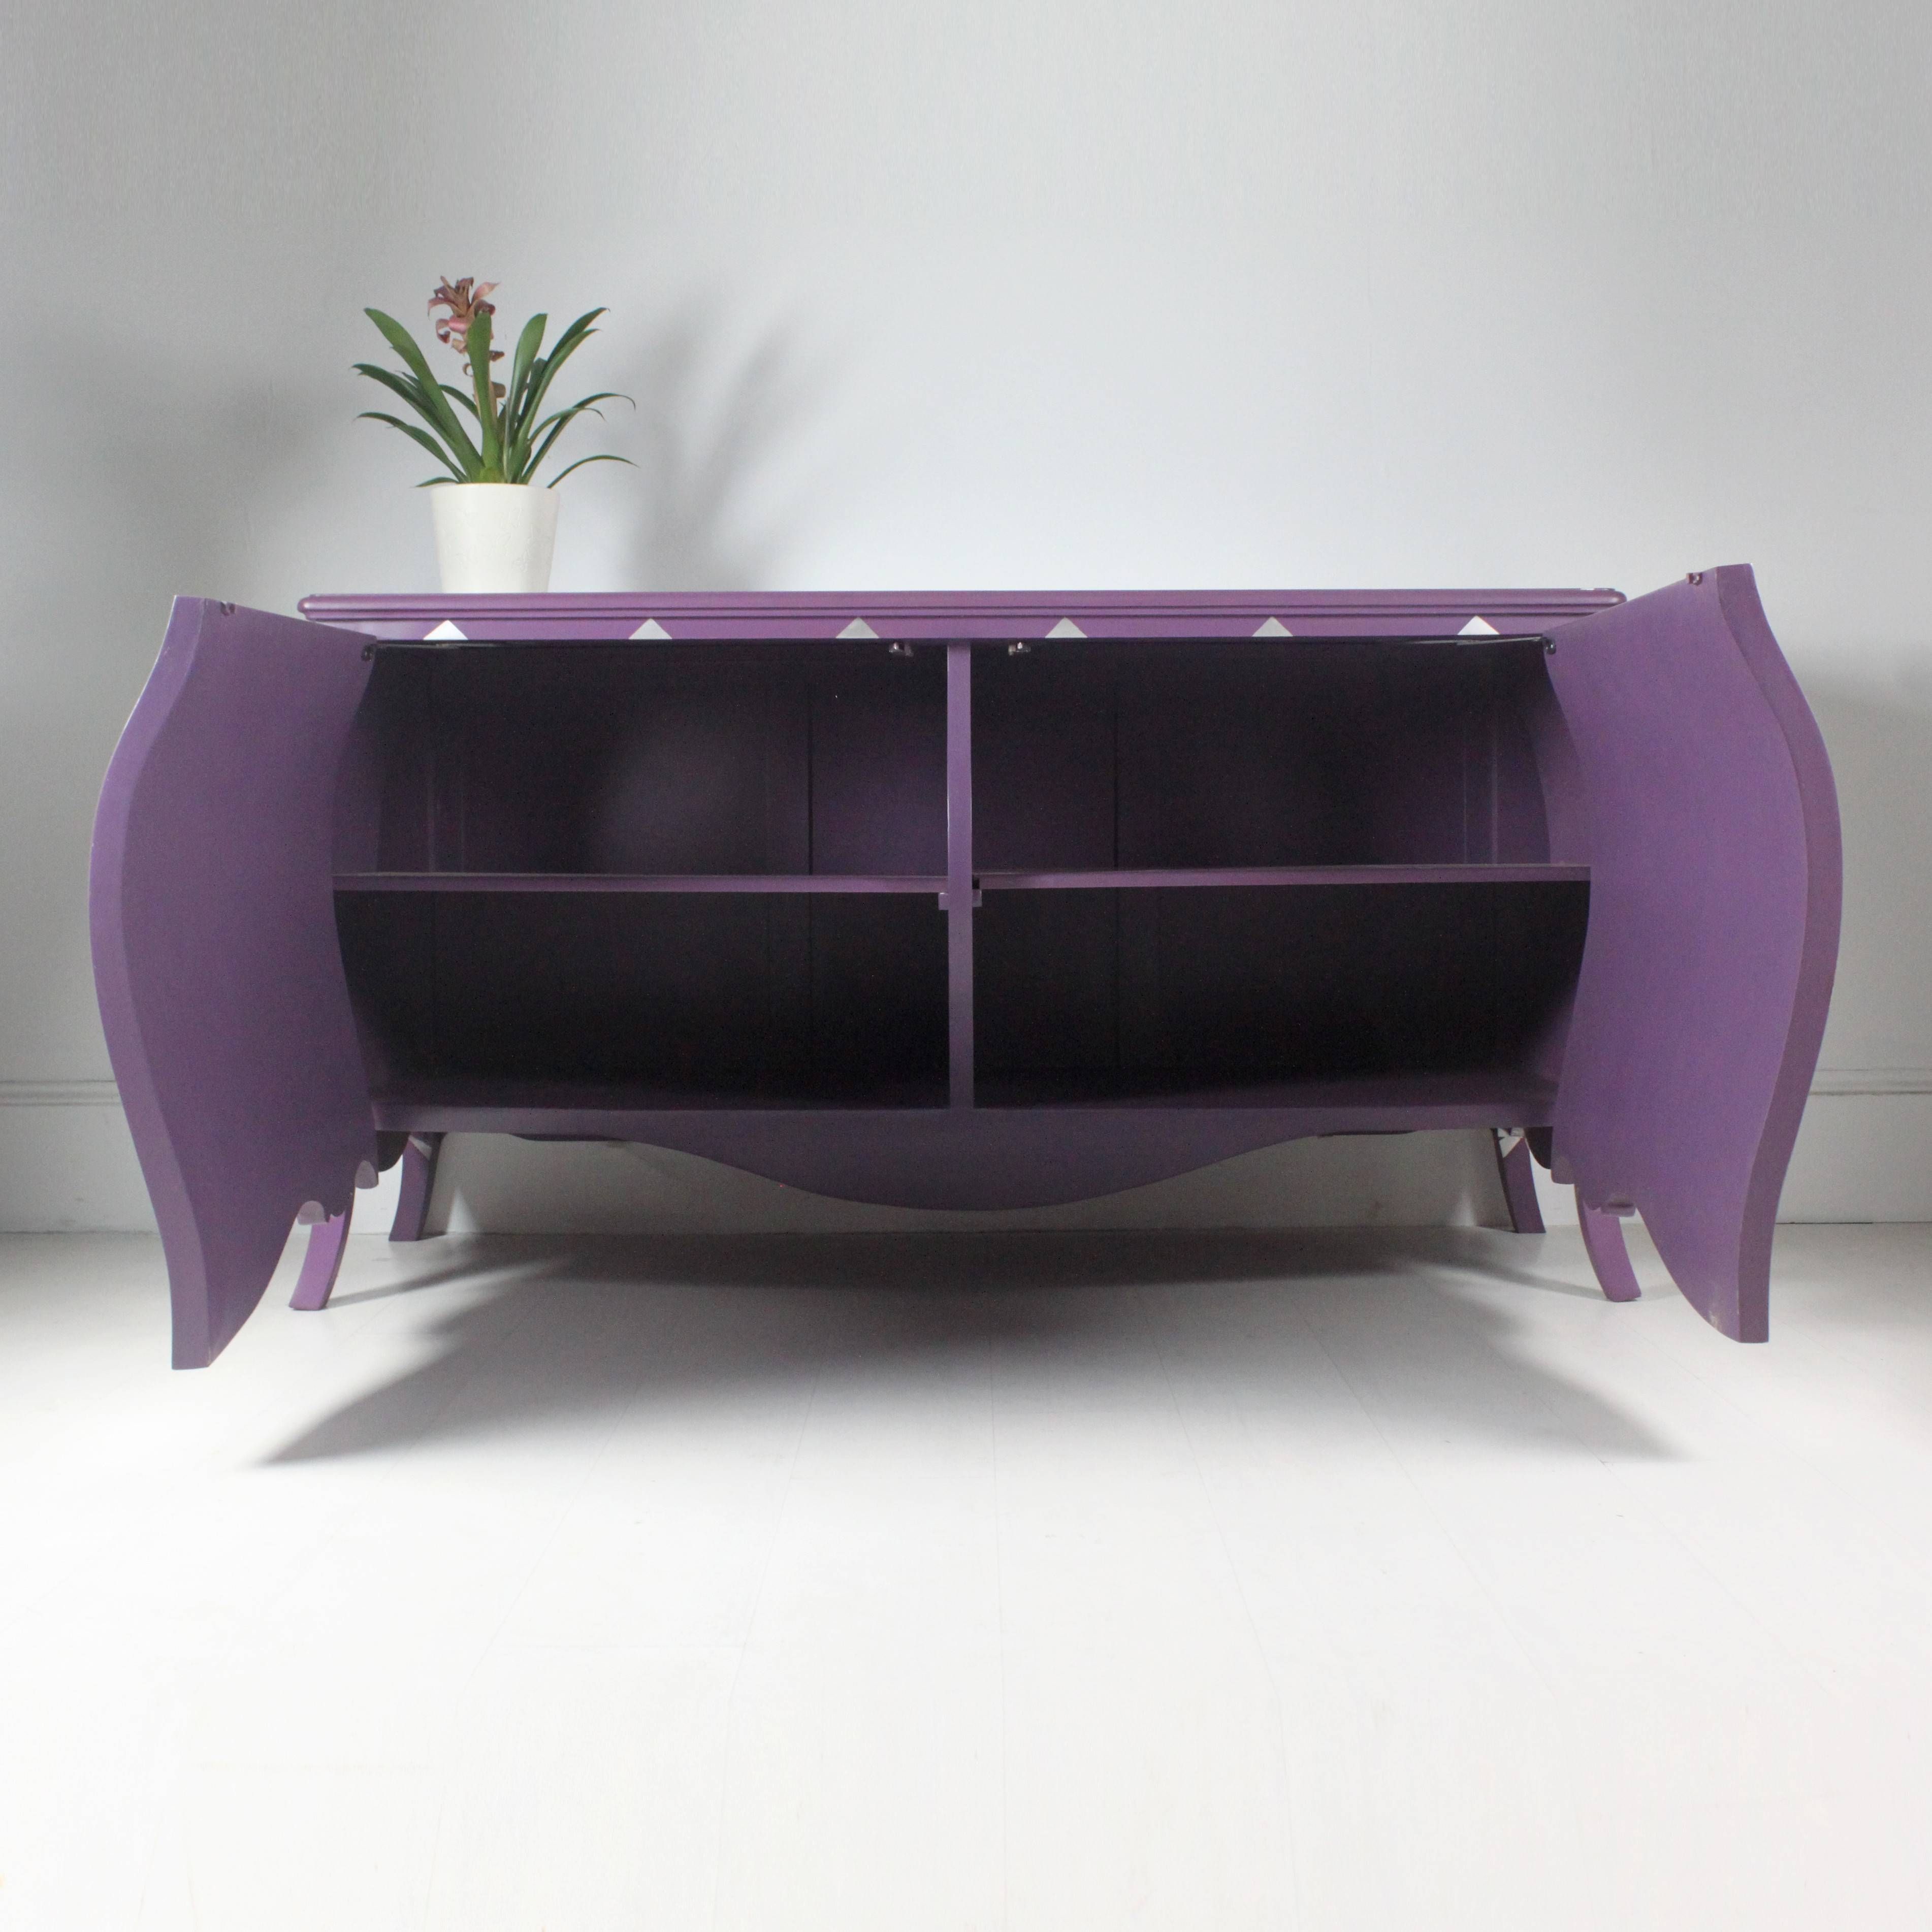 Harlequin Sideboard In Purple For Purple Sideboards (View 5 of 30)